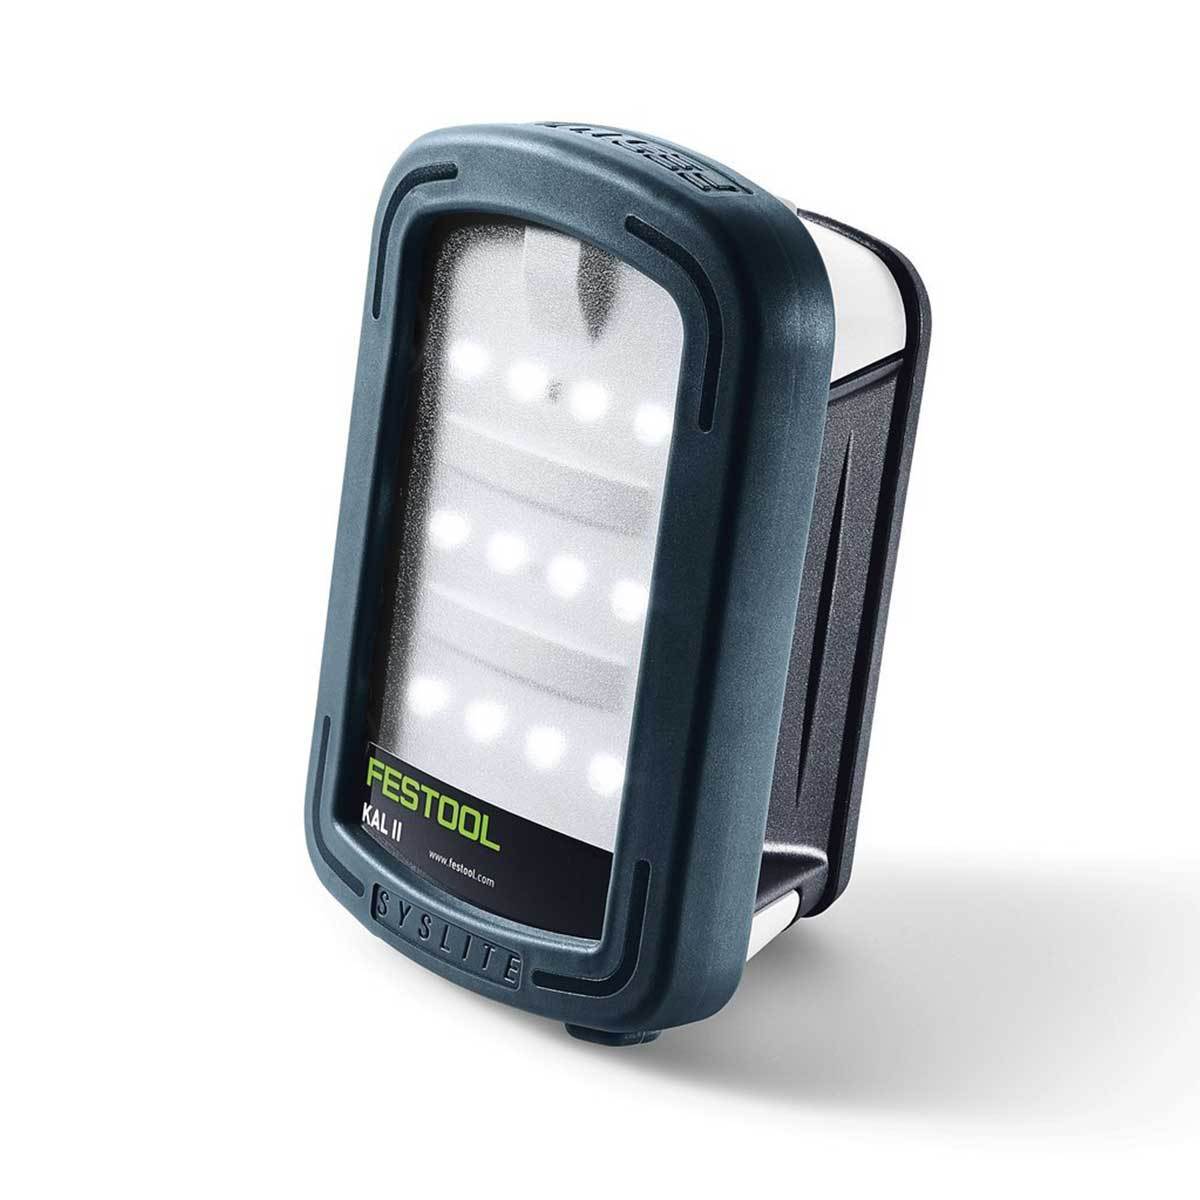 The SysLite II has 12 LEDs and a tough rubber housing. Ridges on the asymmetrical body provide a secure grip.